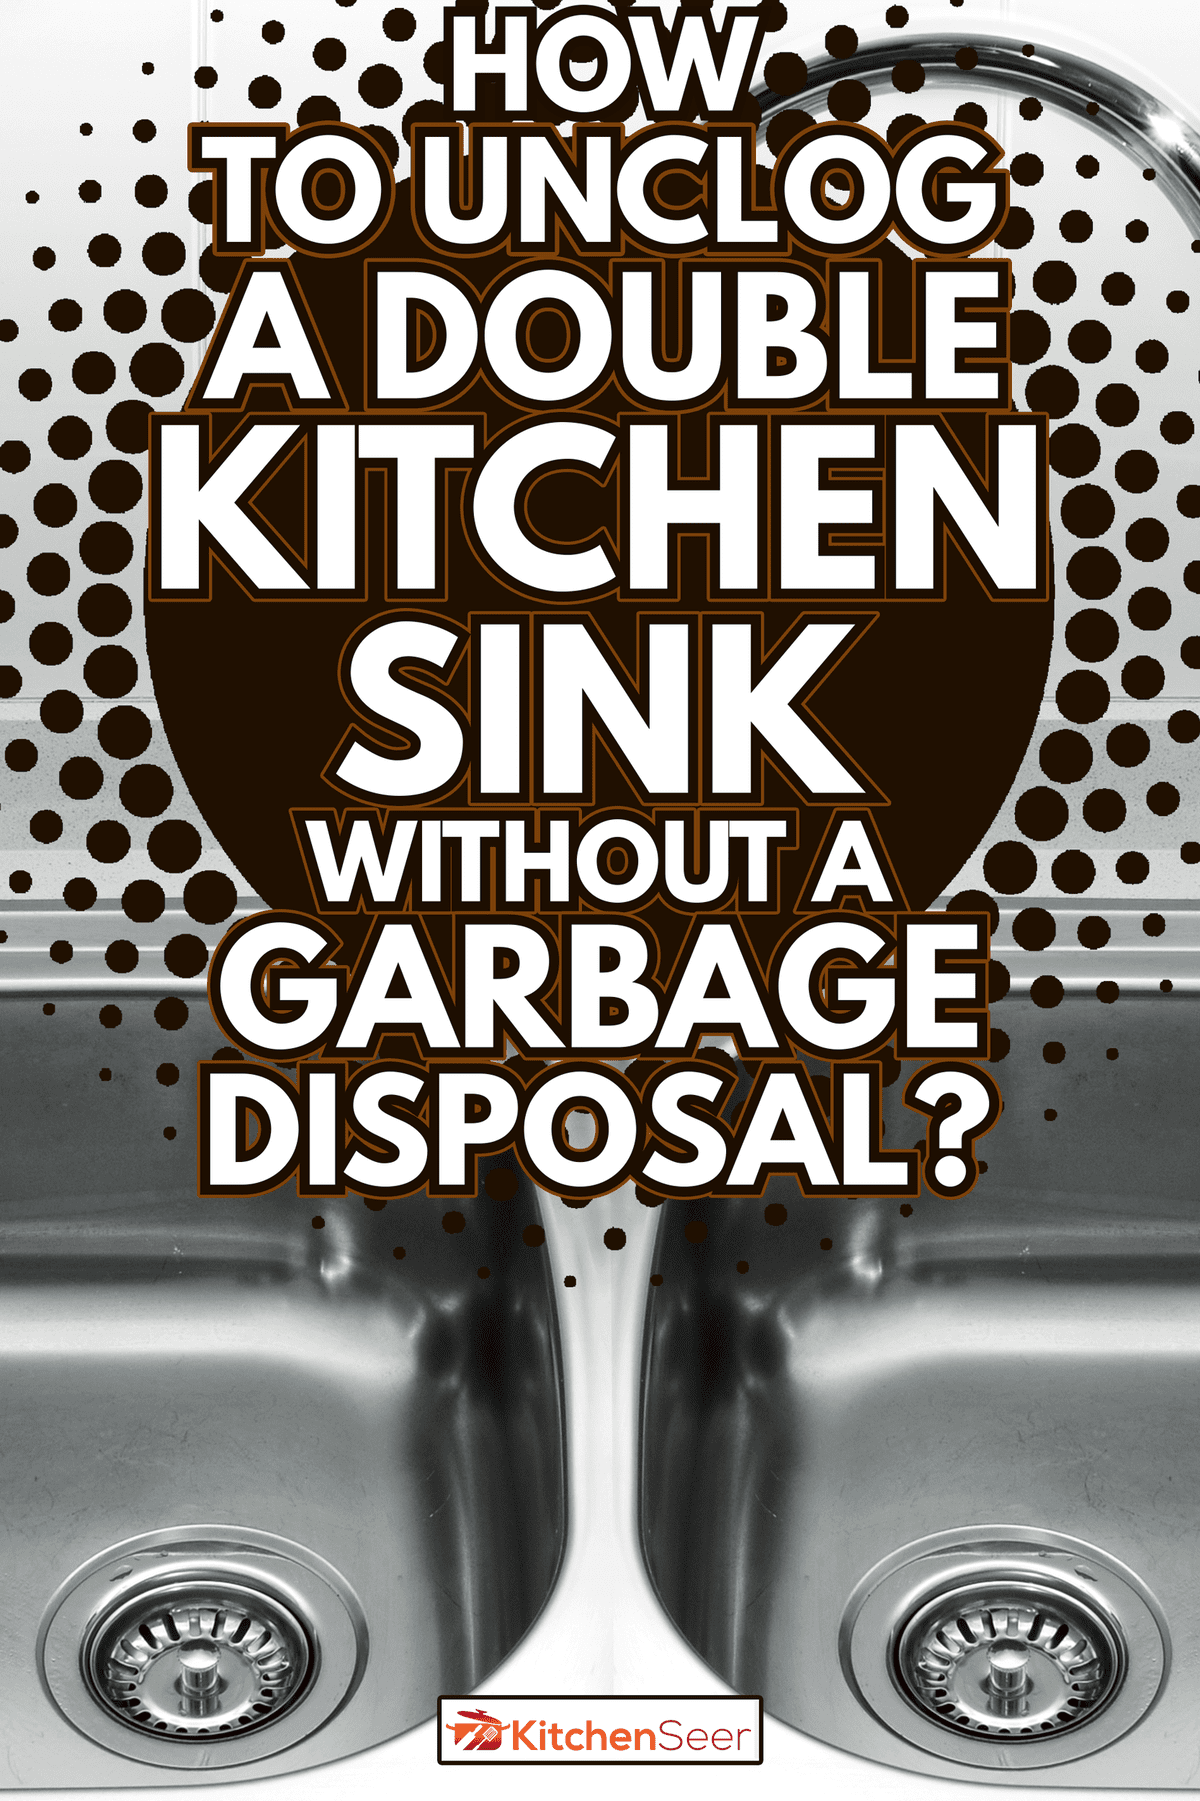 a double bowl stainless steel kitchen sink on a white granite worktop - How To Unclog A Double Kitchen Sink Without Garbage Disposal